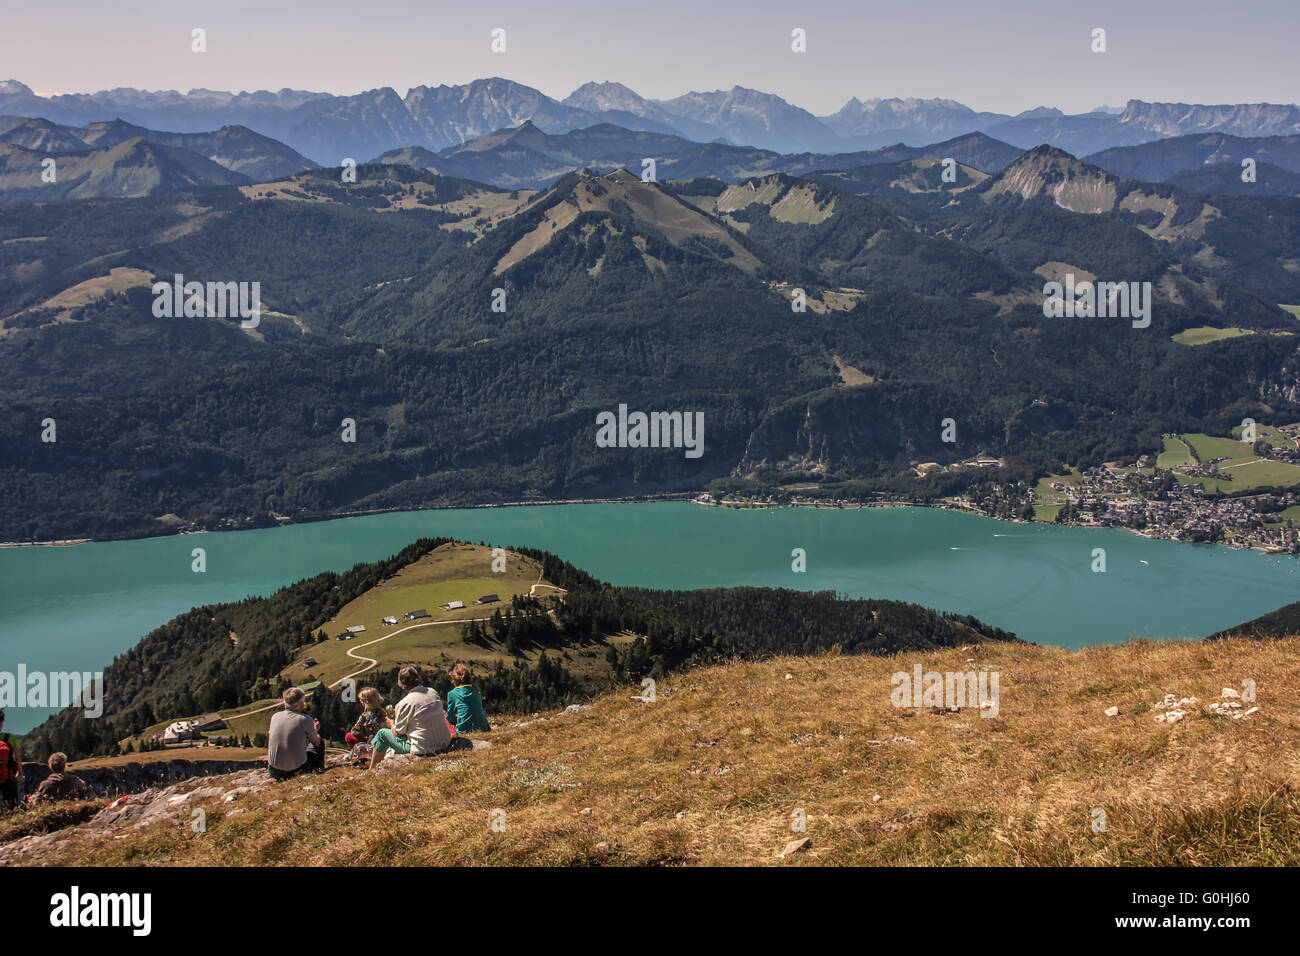 View of the mountain Schaf on the Wolfgang's lake and the surrounding mountain landscape Stock Photo